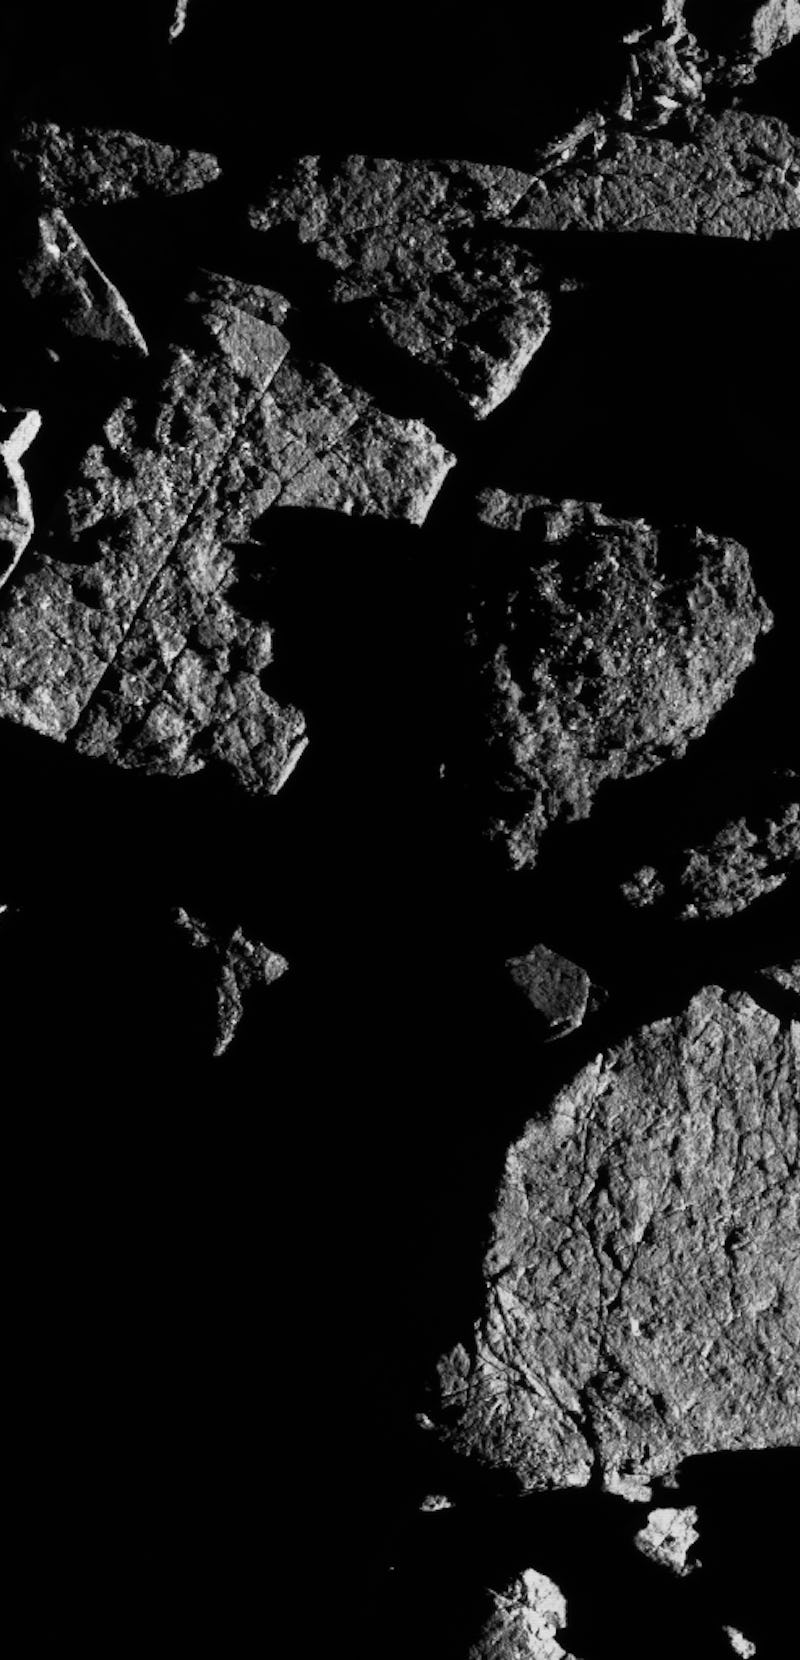 close-up shot of Bennu’s rocks showing the thermal fracturing of an asteroid